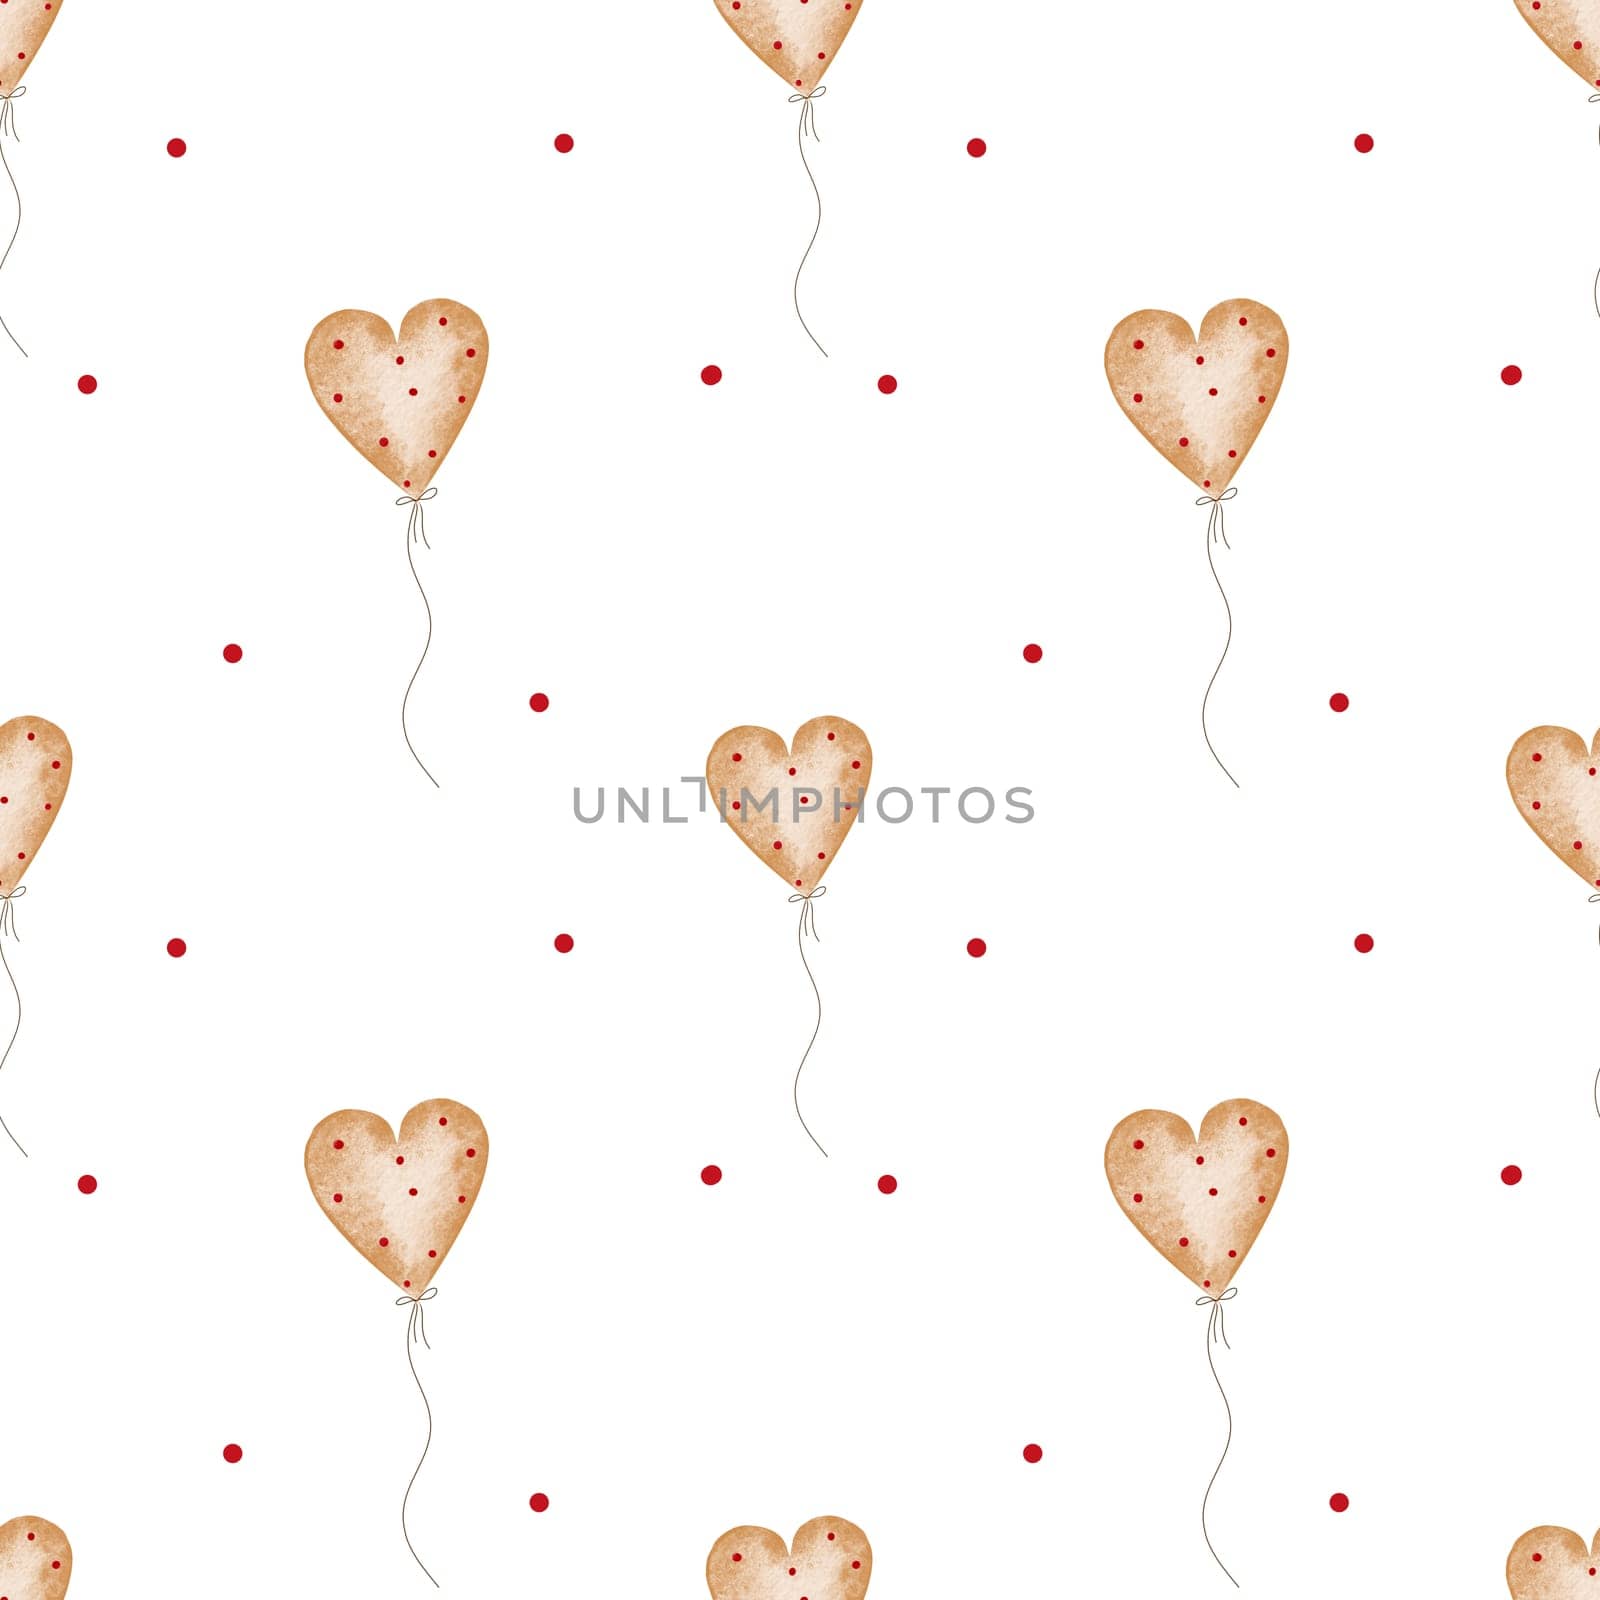 Cute watercolor pattern with heart balloons. seamless texture for printing on fabrics and packaging paper. Valentine's day illustration.